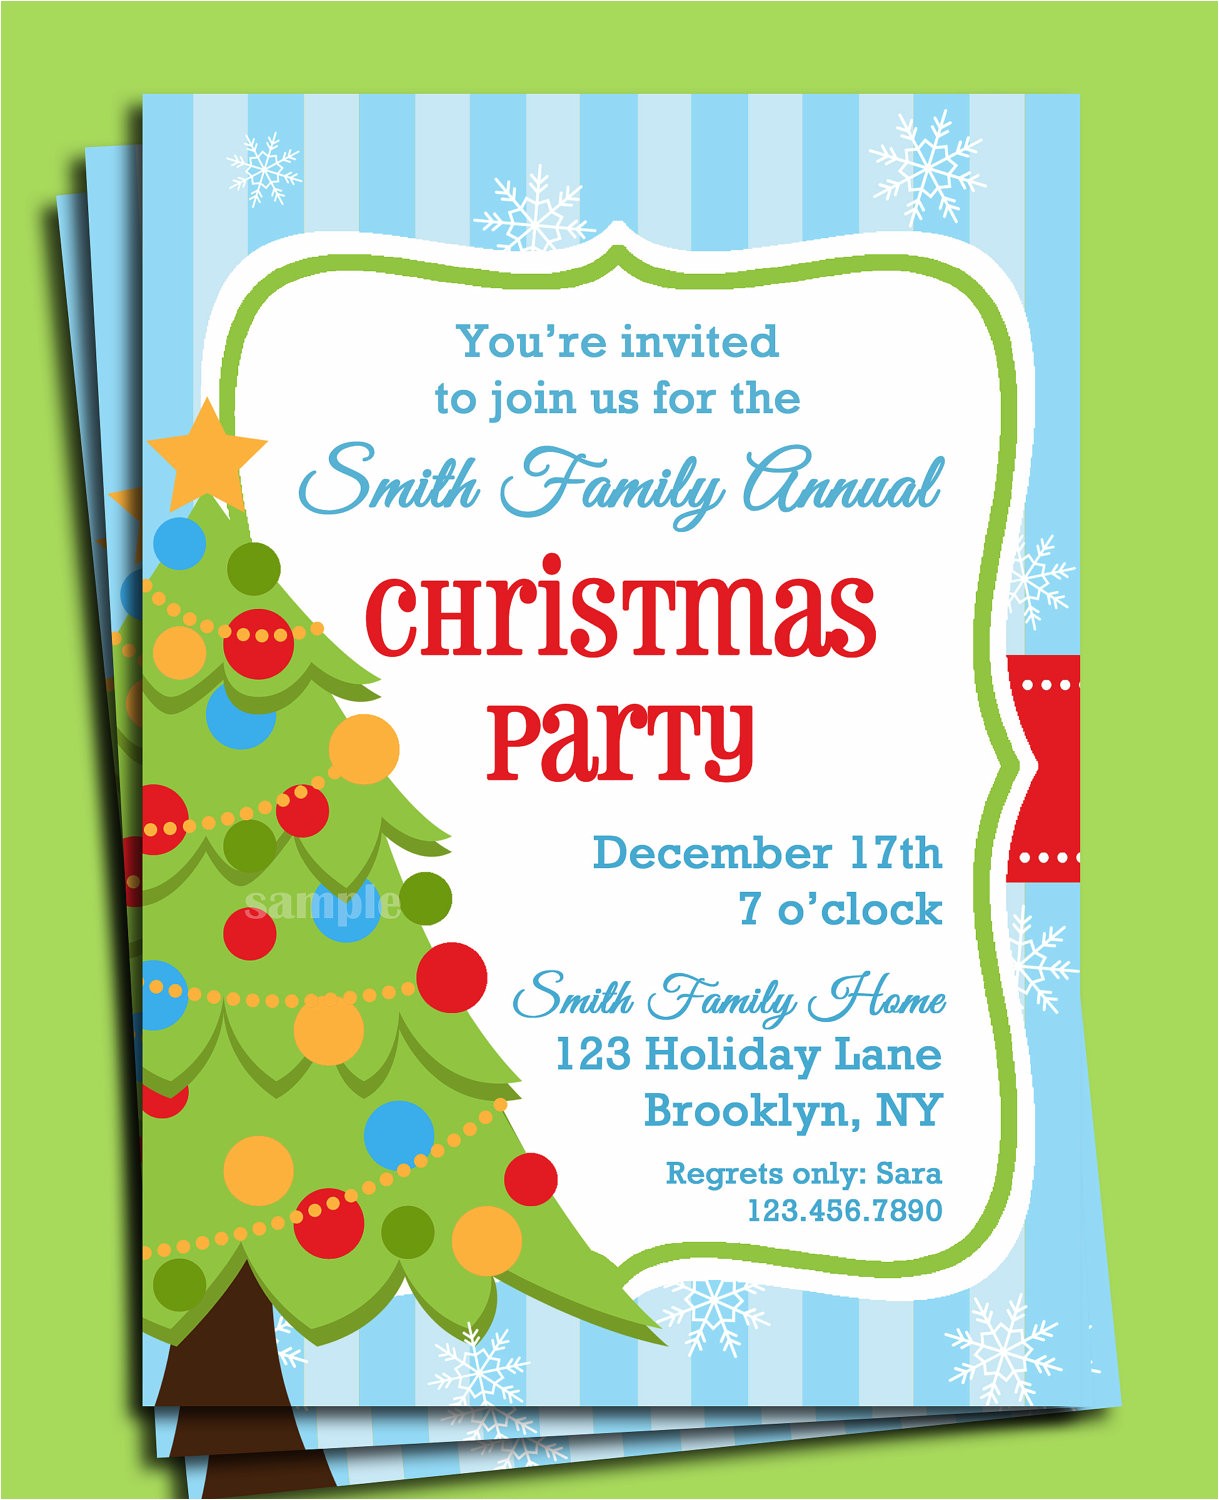 Funny Work Holiday Party Invitation Wording Office Christmas Party Invitation Wording Cimvitation